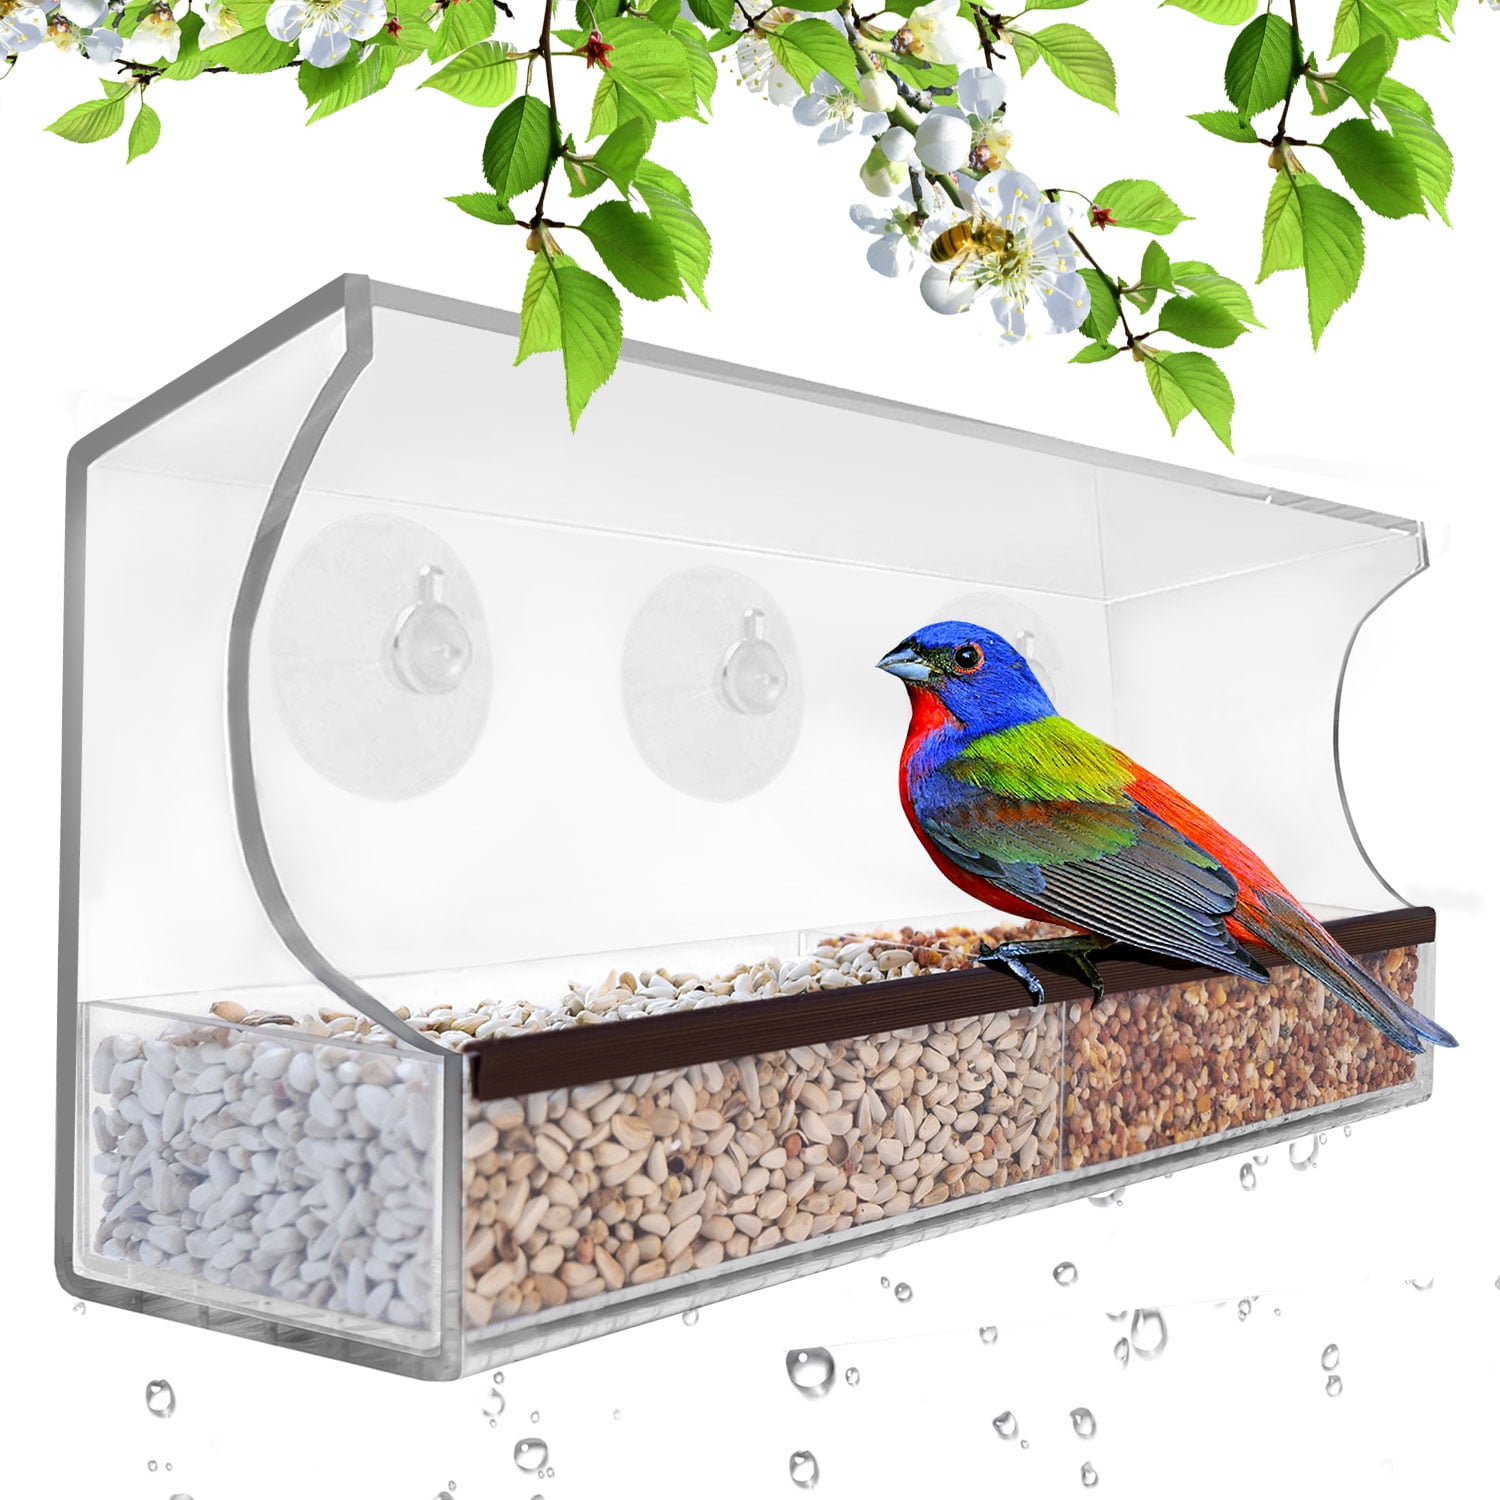 Outdoor Window Bird Feeder with Strong Suction Cup View Wild Backyard Birds 